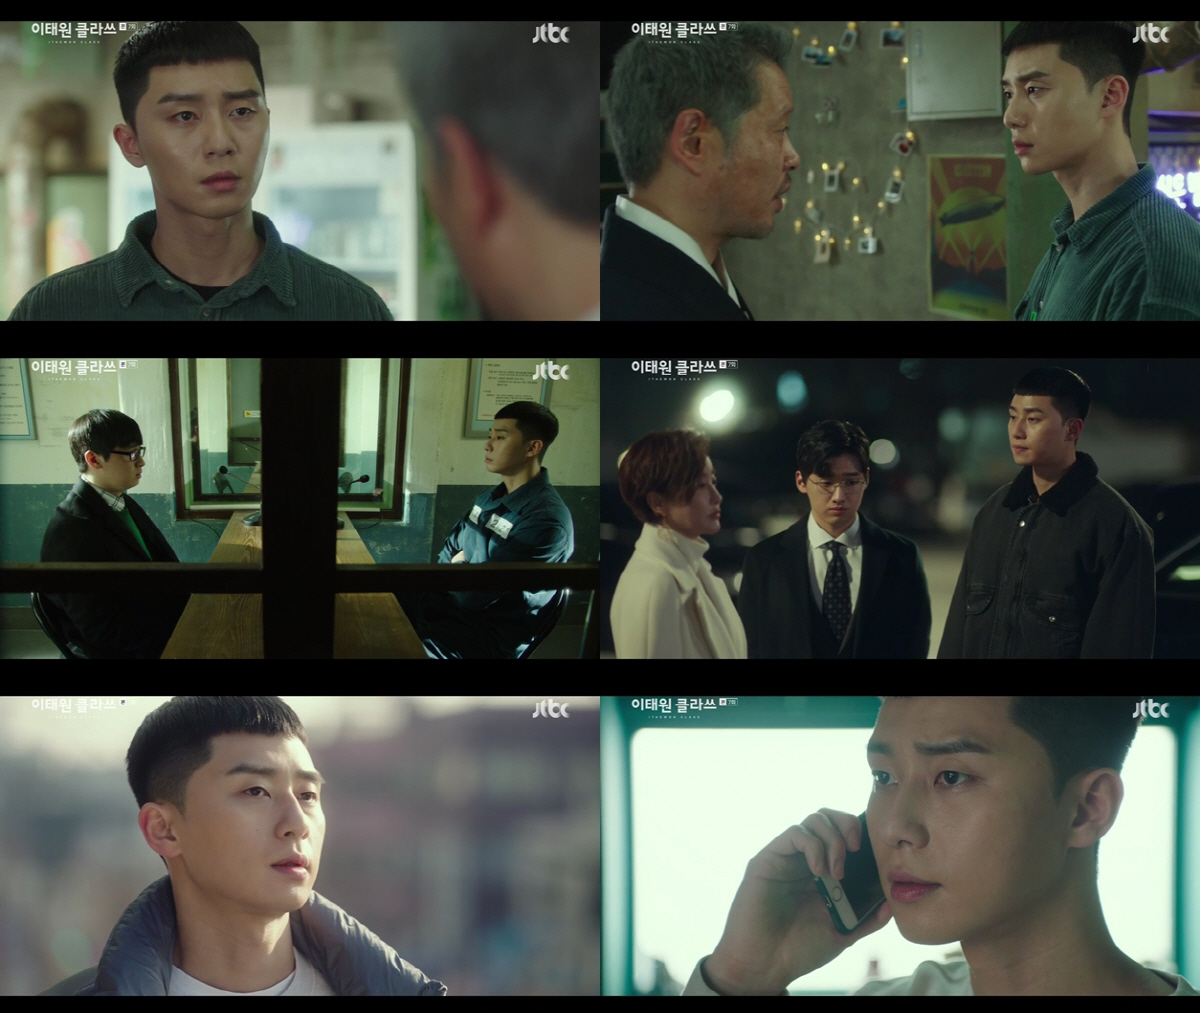 Park Seo-joon captivated viewers with overwhelming screen control leading the drama.Park Seo-joon, who played the role of Roy in JTBCs Golden Drama Itaewon Clath, presented a thrilling catharsis by announcing the start of a counterattack against Jang Dae-hee (Yoo Jae-myeong), chairman of the Janga.In the 7th broadcast on the 21st, the hidden card of the Park Roy, which will break down the Jangga, was released.The two men who became one side of the relationship that saved Lee Ho-jin (Idawit), who was bullied by Jang Geun-won (Ahn Bo-hyun) in high school, were preparing for revenge for Janga.Park Sae-Roy was investing in Jangga stocks with the help of Lee Ho-jin, who became a fund manager, and provided an opportunity to access the director of Janggas major shareholder Kang Min-jung (Kim Hye-eun).In order to move the mind of Kang Min-jung, Park Roy stimulated Jang Dae-hee to come to Sweet Night, and surprised even those who acted by hiding their true heart.In addition, it was revealed that Park was persuading ODetective (Yoon Kyung-ho), who was in charge of his fathers hit-and-run case more than a decade ago.The confession of ODetective was to make the Janga rich pay for it.As the counterattack of Roy toward Janga began, Sanbam is in crisis to empty the store as Landlord changes.However, he realized that the new Landlord was President Jang Dae-hee and foresaw the sharp confrontation between the two, adding to the curiosity of future development.On this day, Park Seo-joon maintained a tight tension from beginning to end, and increased the concentration of viewers with the power to lead the drama.It perfectly expresses the Park, which reveals the detail behind the emotional appearance, and adds the fun of the drama with the charm of the character.Park Seo-joon, who has attracted viewers favorable comments with his deepening acting and differentiated character expression as the episode continues, is adding strength to the Itaewon Clath craze by catching both ratings and topics.Meanwhile, the 8th episode of Itaewon Clath starring Park Seo-joon will air at 10:50 p.m. on the 22nd (Saturday).